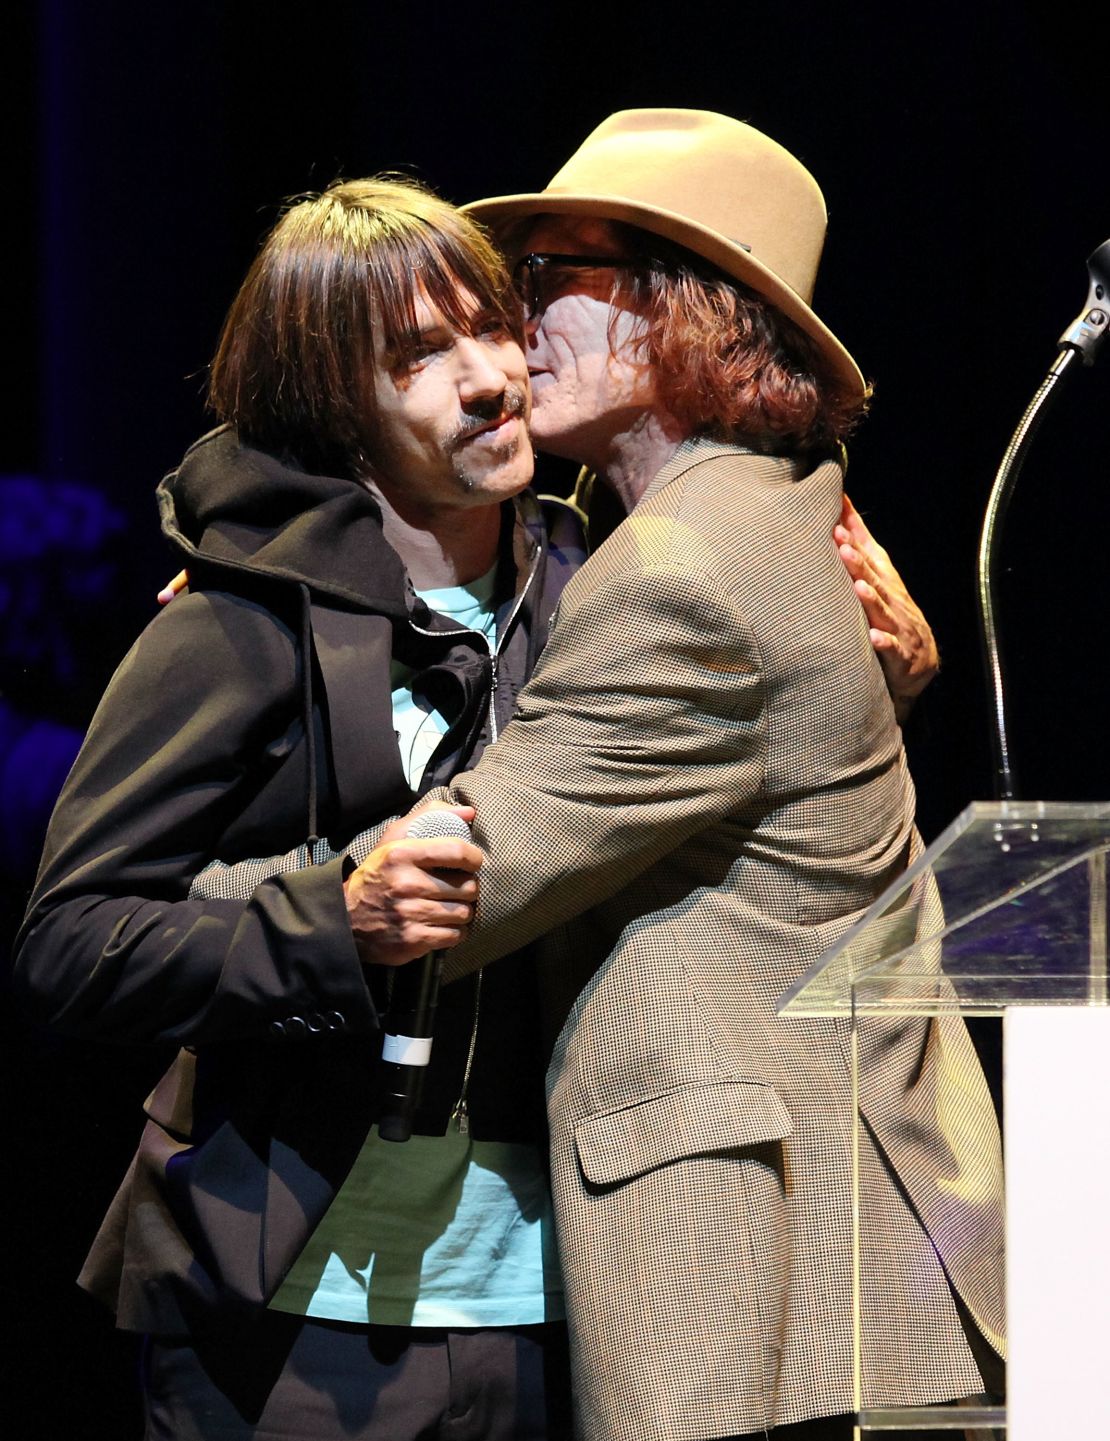 Bob Forrest gives friend and fellow musician Anthony Kiedis an award at a MusicCares fundraiser  in 2009.